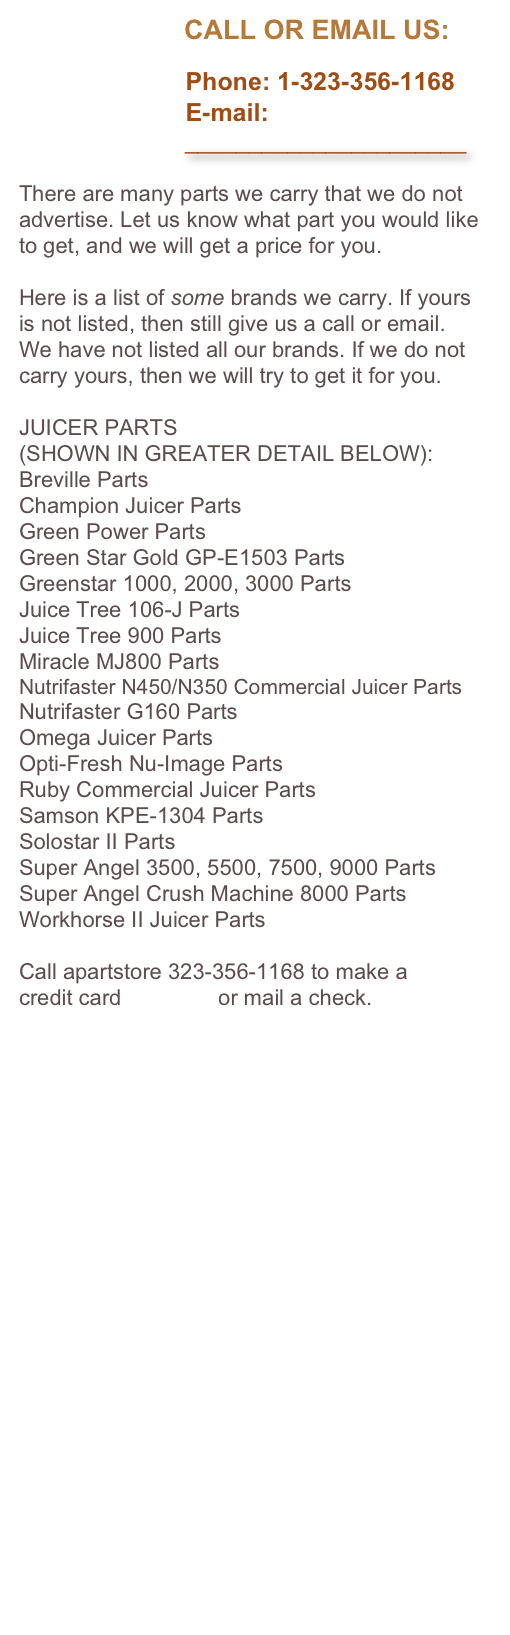                       CALL OR EMAIL US:

                        Phone: 1-323-356-1168
                        E-mail: 
                          ______________________

There are many parts we carry that we do not advertise. Let us know what part you would like to get, and we will get a price for you. 

Here is a list of some brands we carry. If yours is not listed, then still give us a call or email. We have not listed all our brands. If we do not carry yours, then we will try to get it for you.

JUICER PARTS 
(SHOWN IN GREATER DETAIL BELOW):
Breville Parts
Champion Juicer Parts
Green Power Parts
Green Star Gold GP-E1503 Parts
Greenstar 1000, 2000, 3000 Parts
Juice Tree 106-J Parts
Juice Tree 900 Parts
Miracle MJ800 Parts
Nutrifaster N450/N350 Commercial Juicer Parts
Nutrifaster G160 Parts
Omega Juicer Parts
Opti-Fresh Nu-Image Parts
Ruby Commercial Juicer Parts
Samson KPE-1304 Parts
Solostar II Parts
Super Angel 3500, 5500, 7500, 9000 Parts
Super Angel Crush Machine 8000 Parts
Workhorse II Juicer Parts

Call apartstore 323-356-1168 to make a 
credit card payment or mail a check.